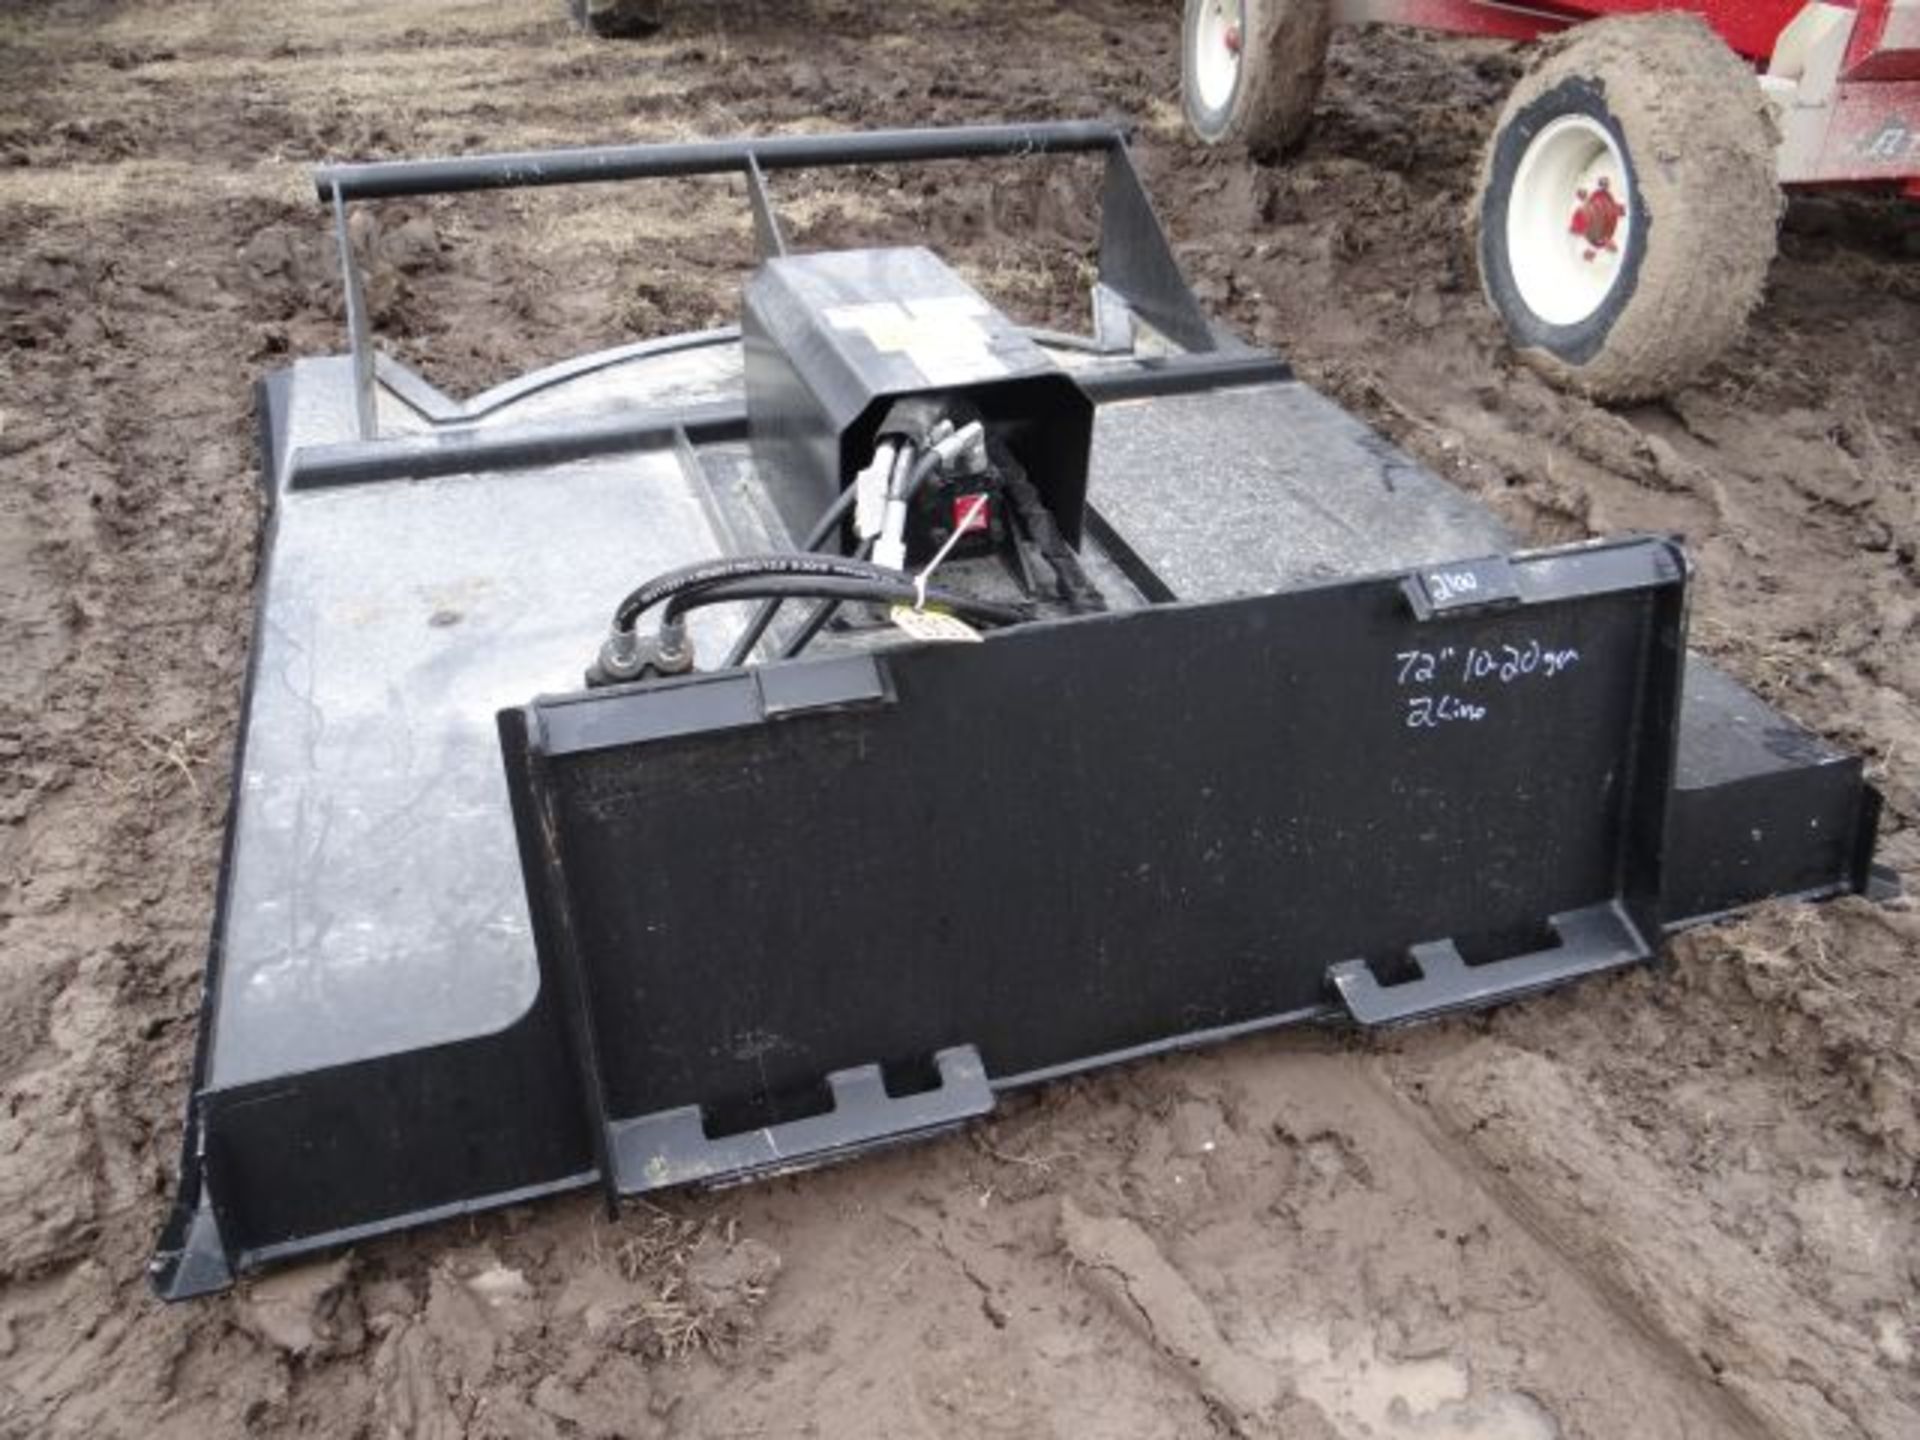 72" Cutter w/Hoses and Couplers, Skid Steer Attachment